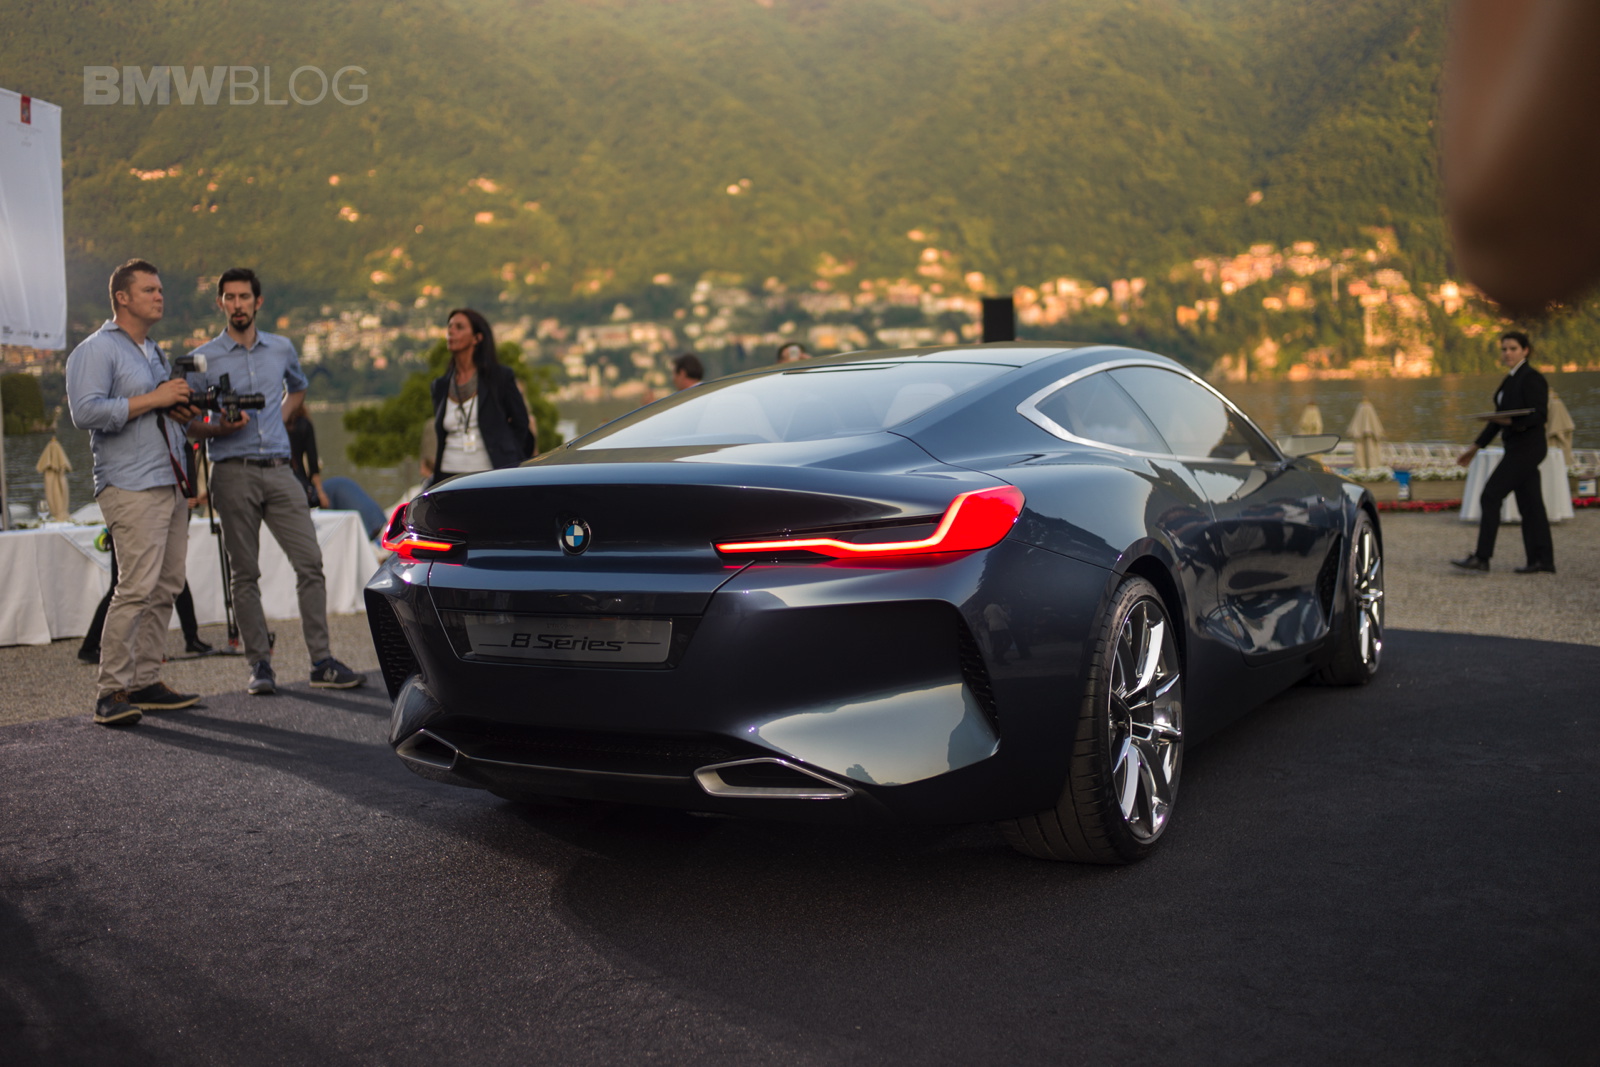 BMW 8 Series Concept pictures 16